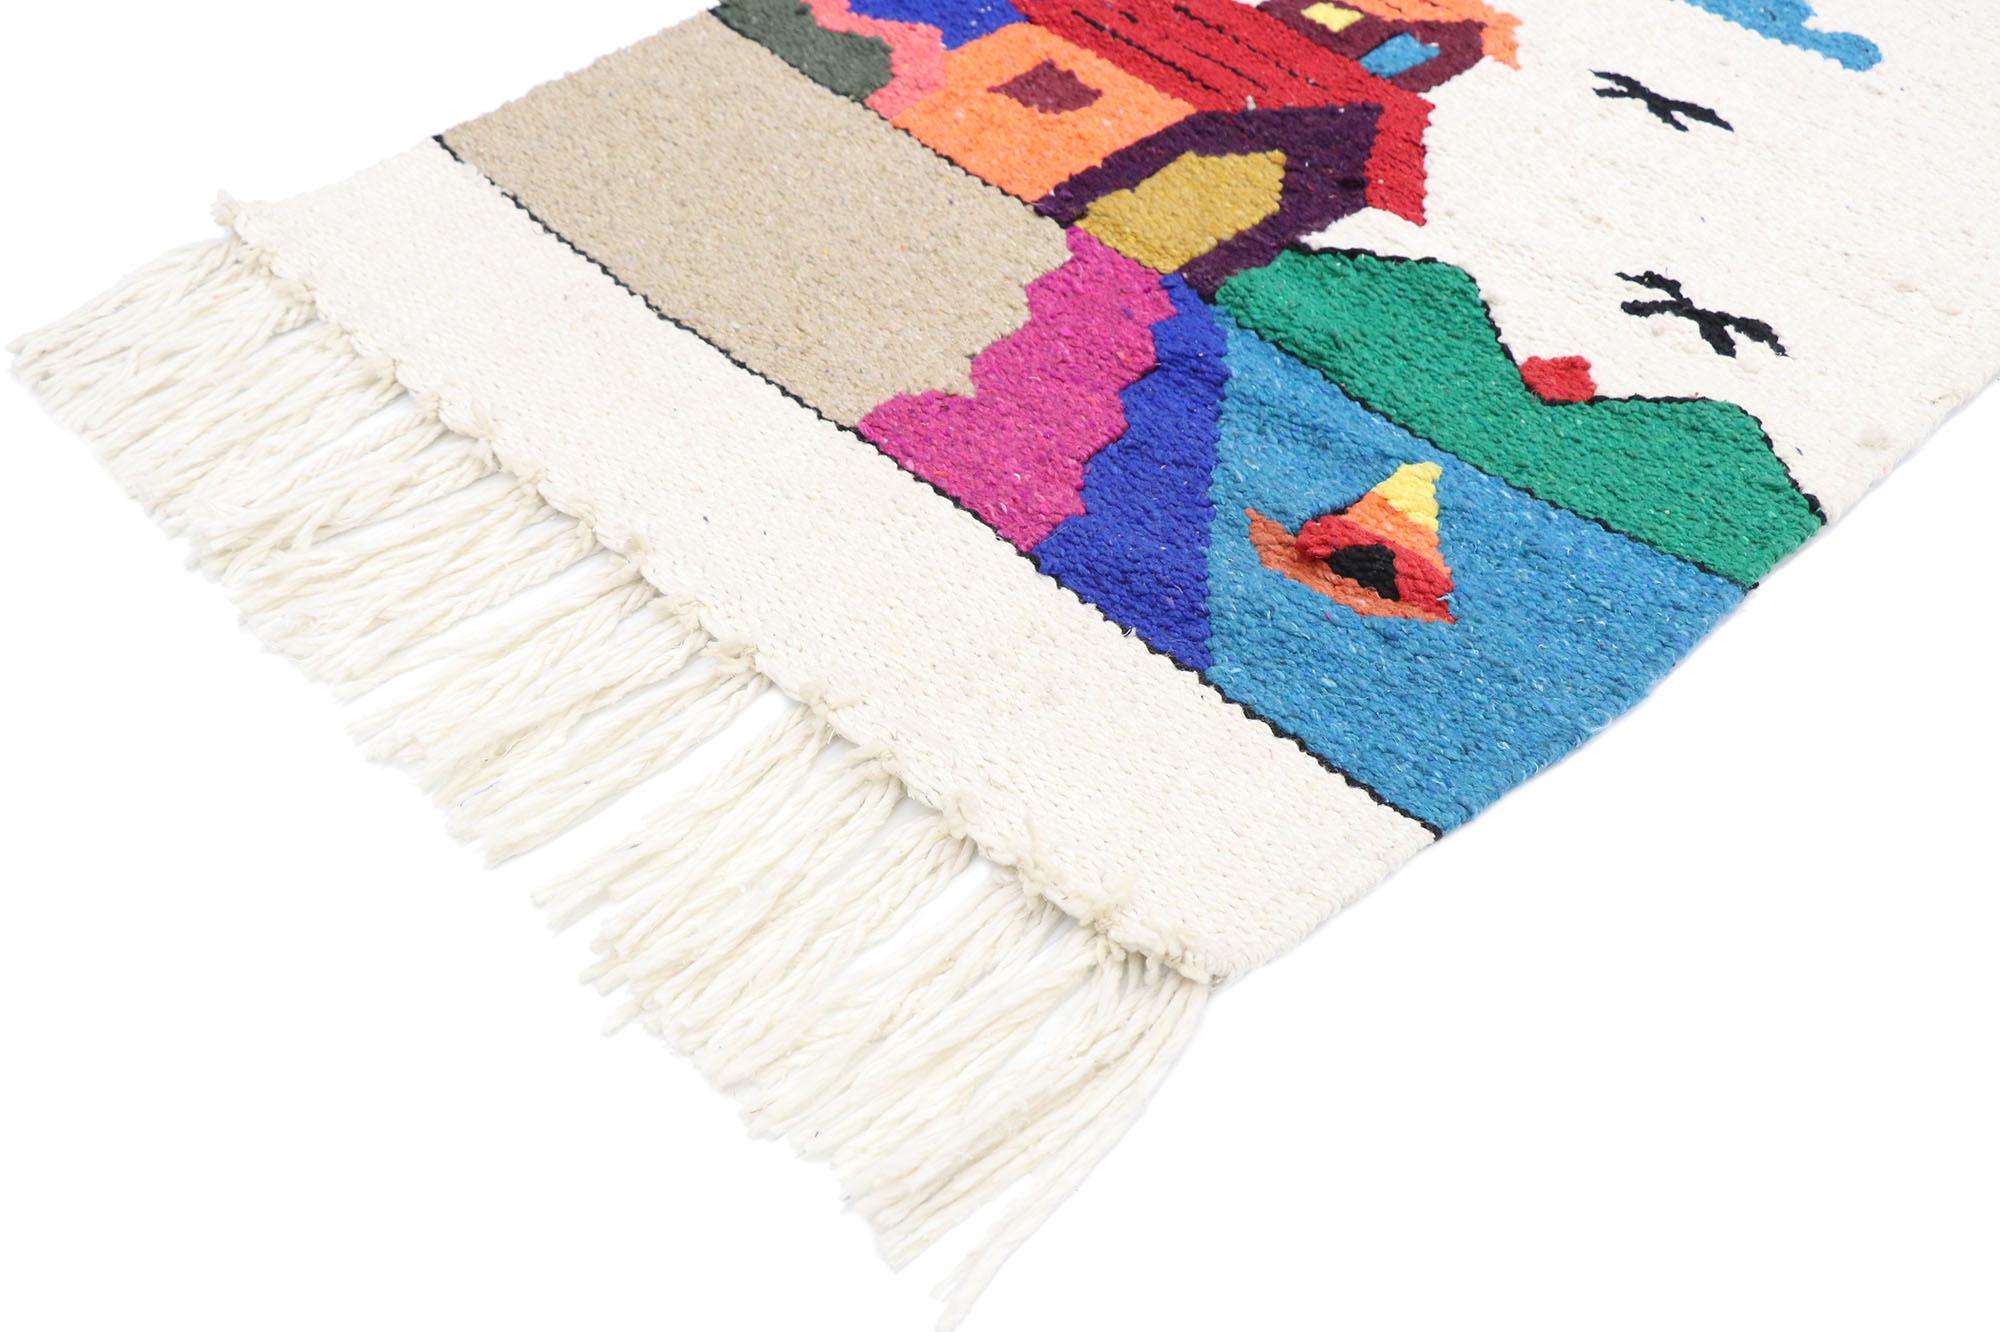 77774 vintage Mexican Tapestry with Boho Chic Folk Art style 02'05 x 03'02. Full of tiny details and a bold expressive design combined with vibrant colors and tribal style, this hand-woven wool vintage Mexican tapestry is a captivating vision of